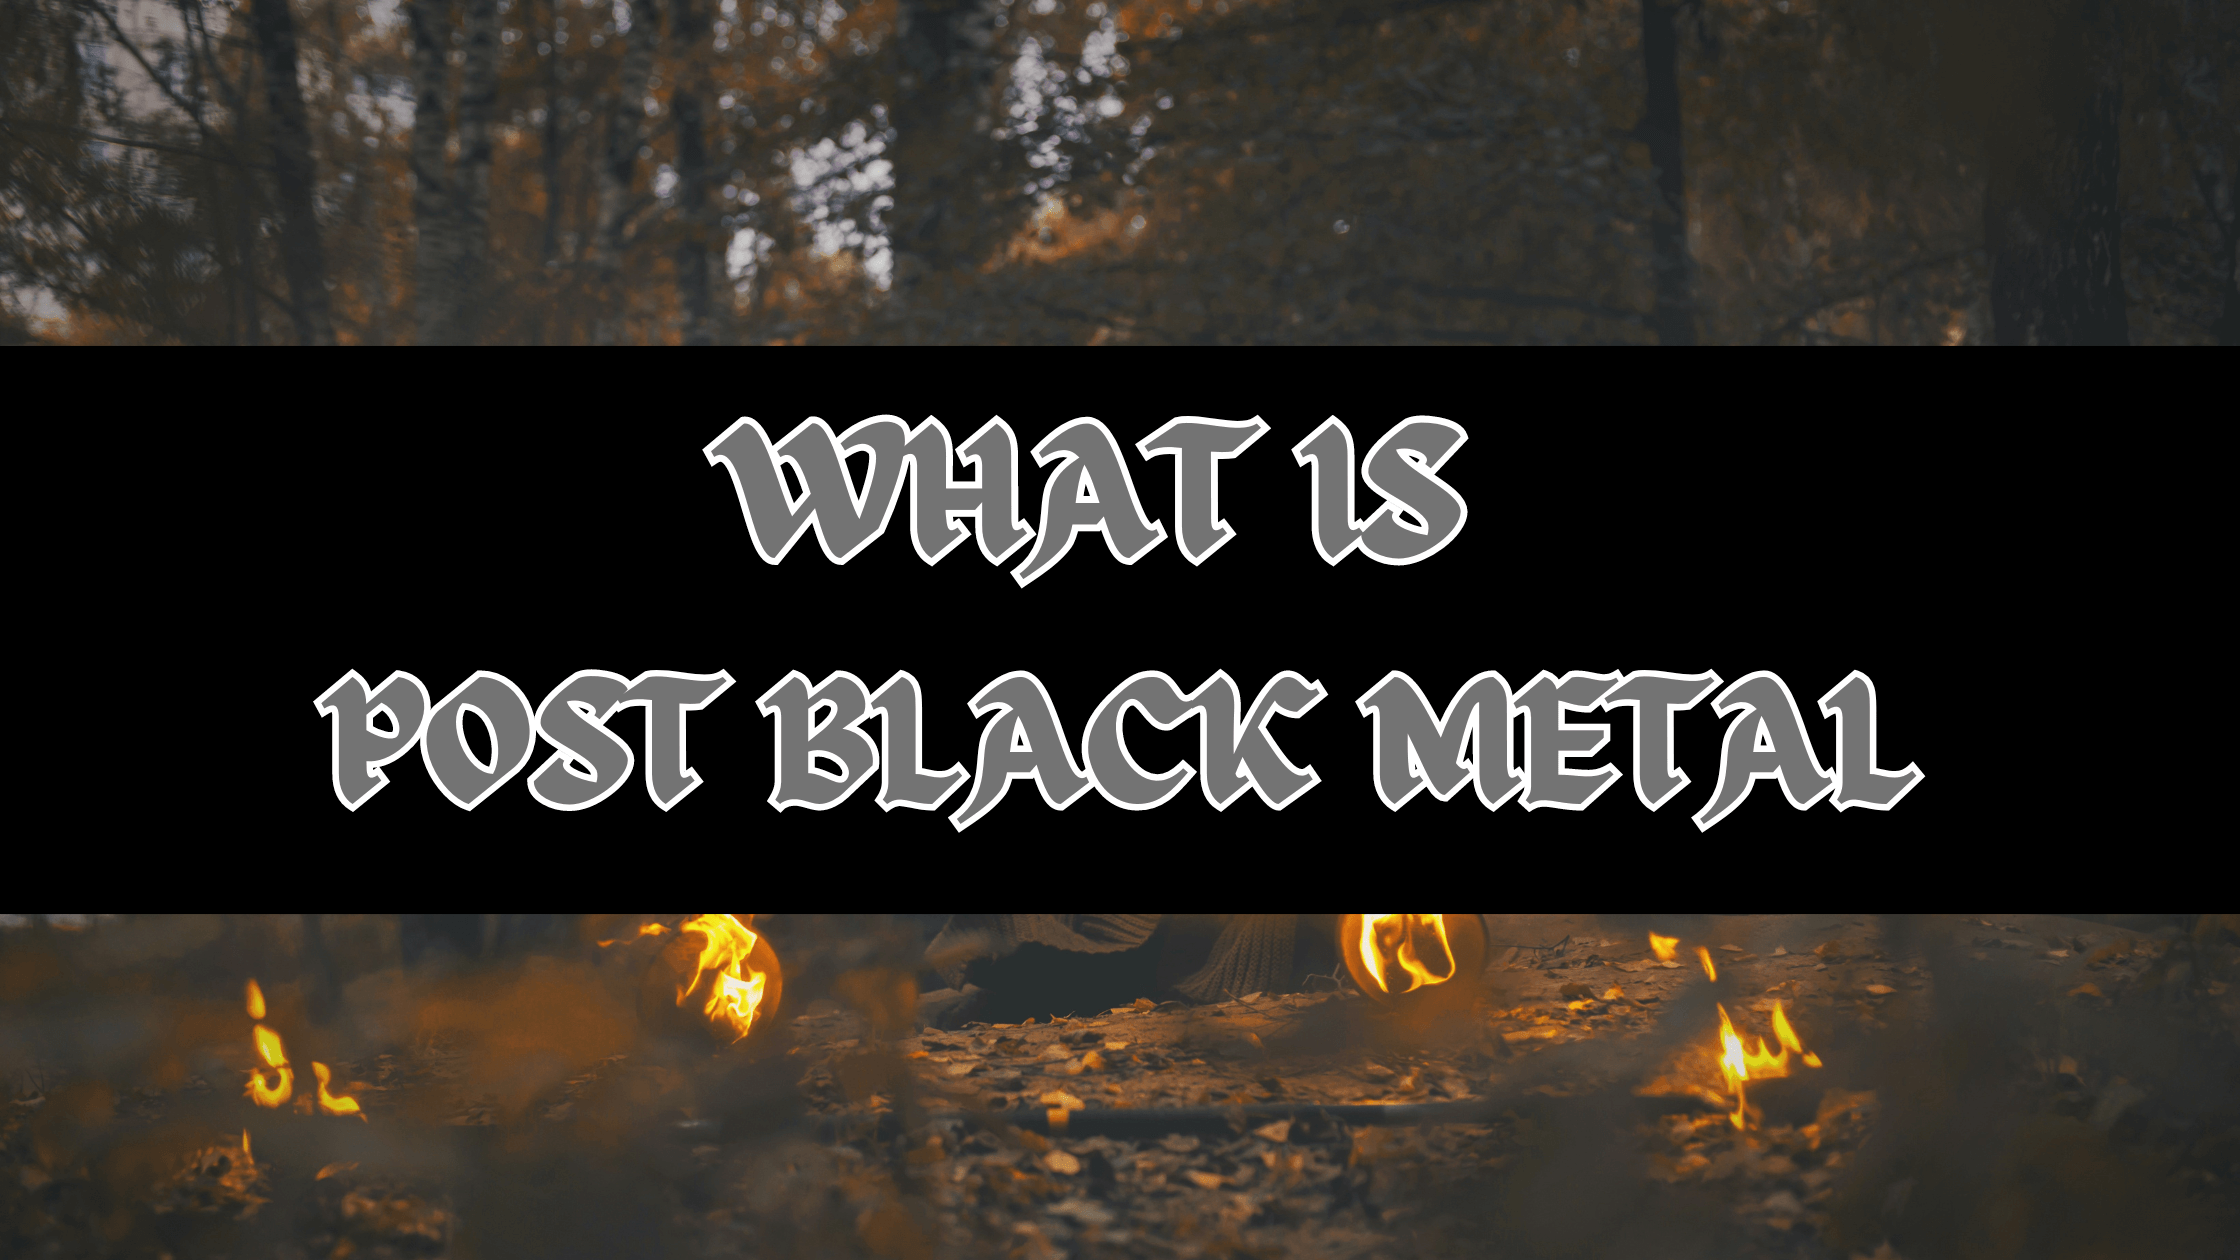 Post Black Metal: Features, famous Bands, Iconic Albums and most relevant Songs for this Heavy Black Metal subgenre and fandom